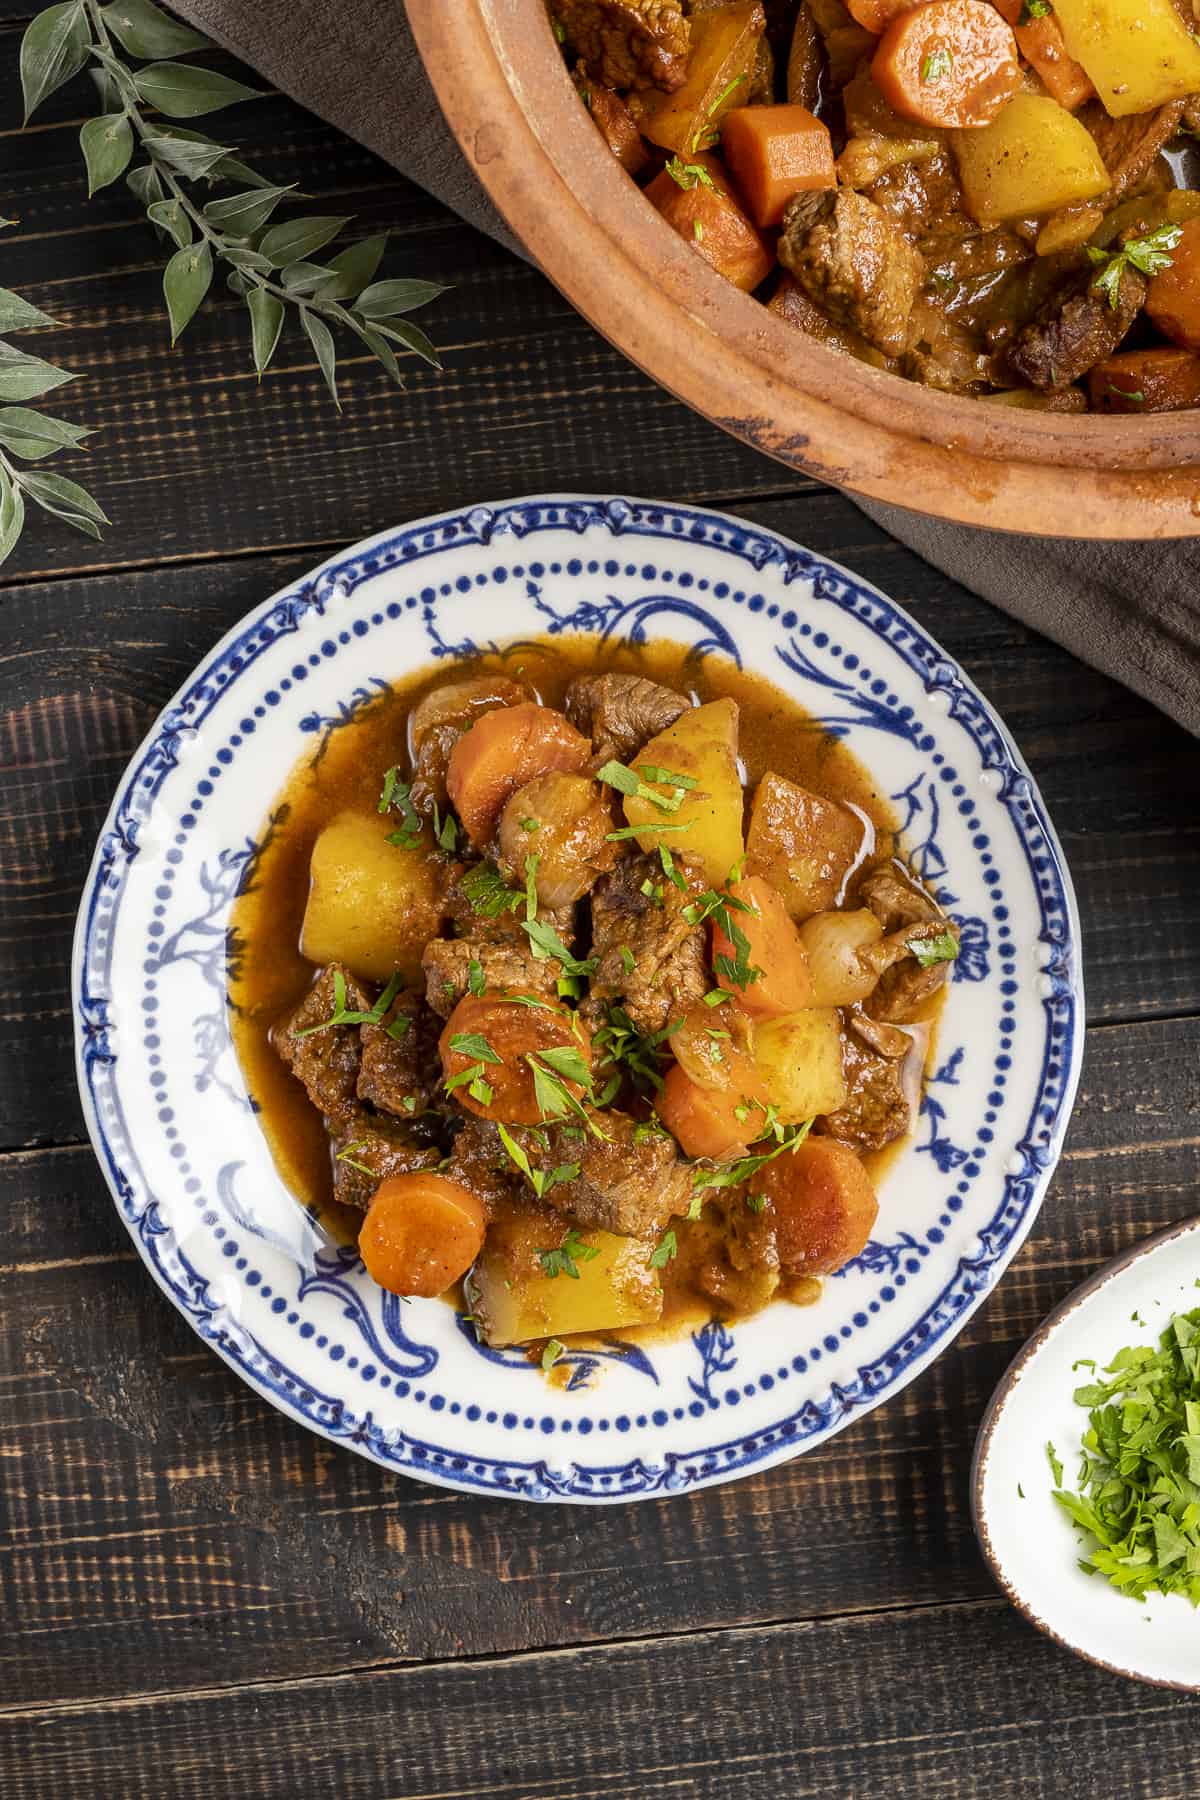 Beef and vegetable stew in a white and blue dish and a clay pot on the side.